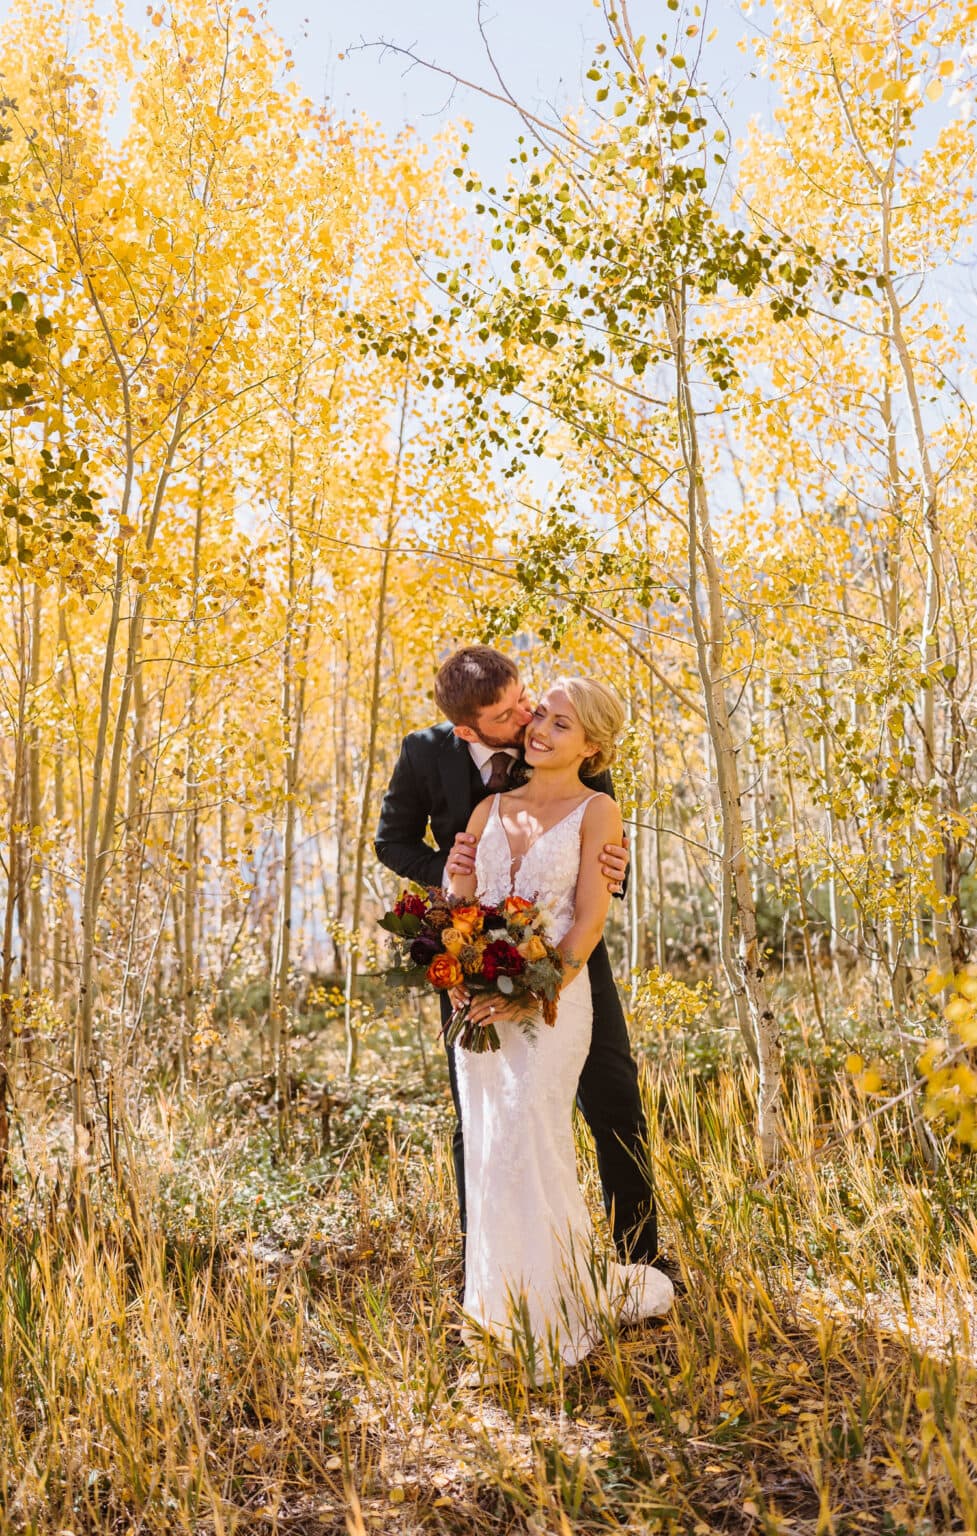 Bride and groom enjoying the leaves of Colorado during the fall season.